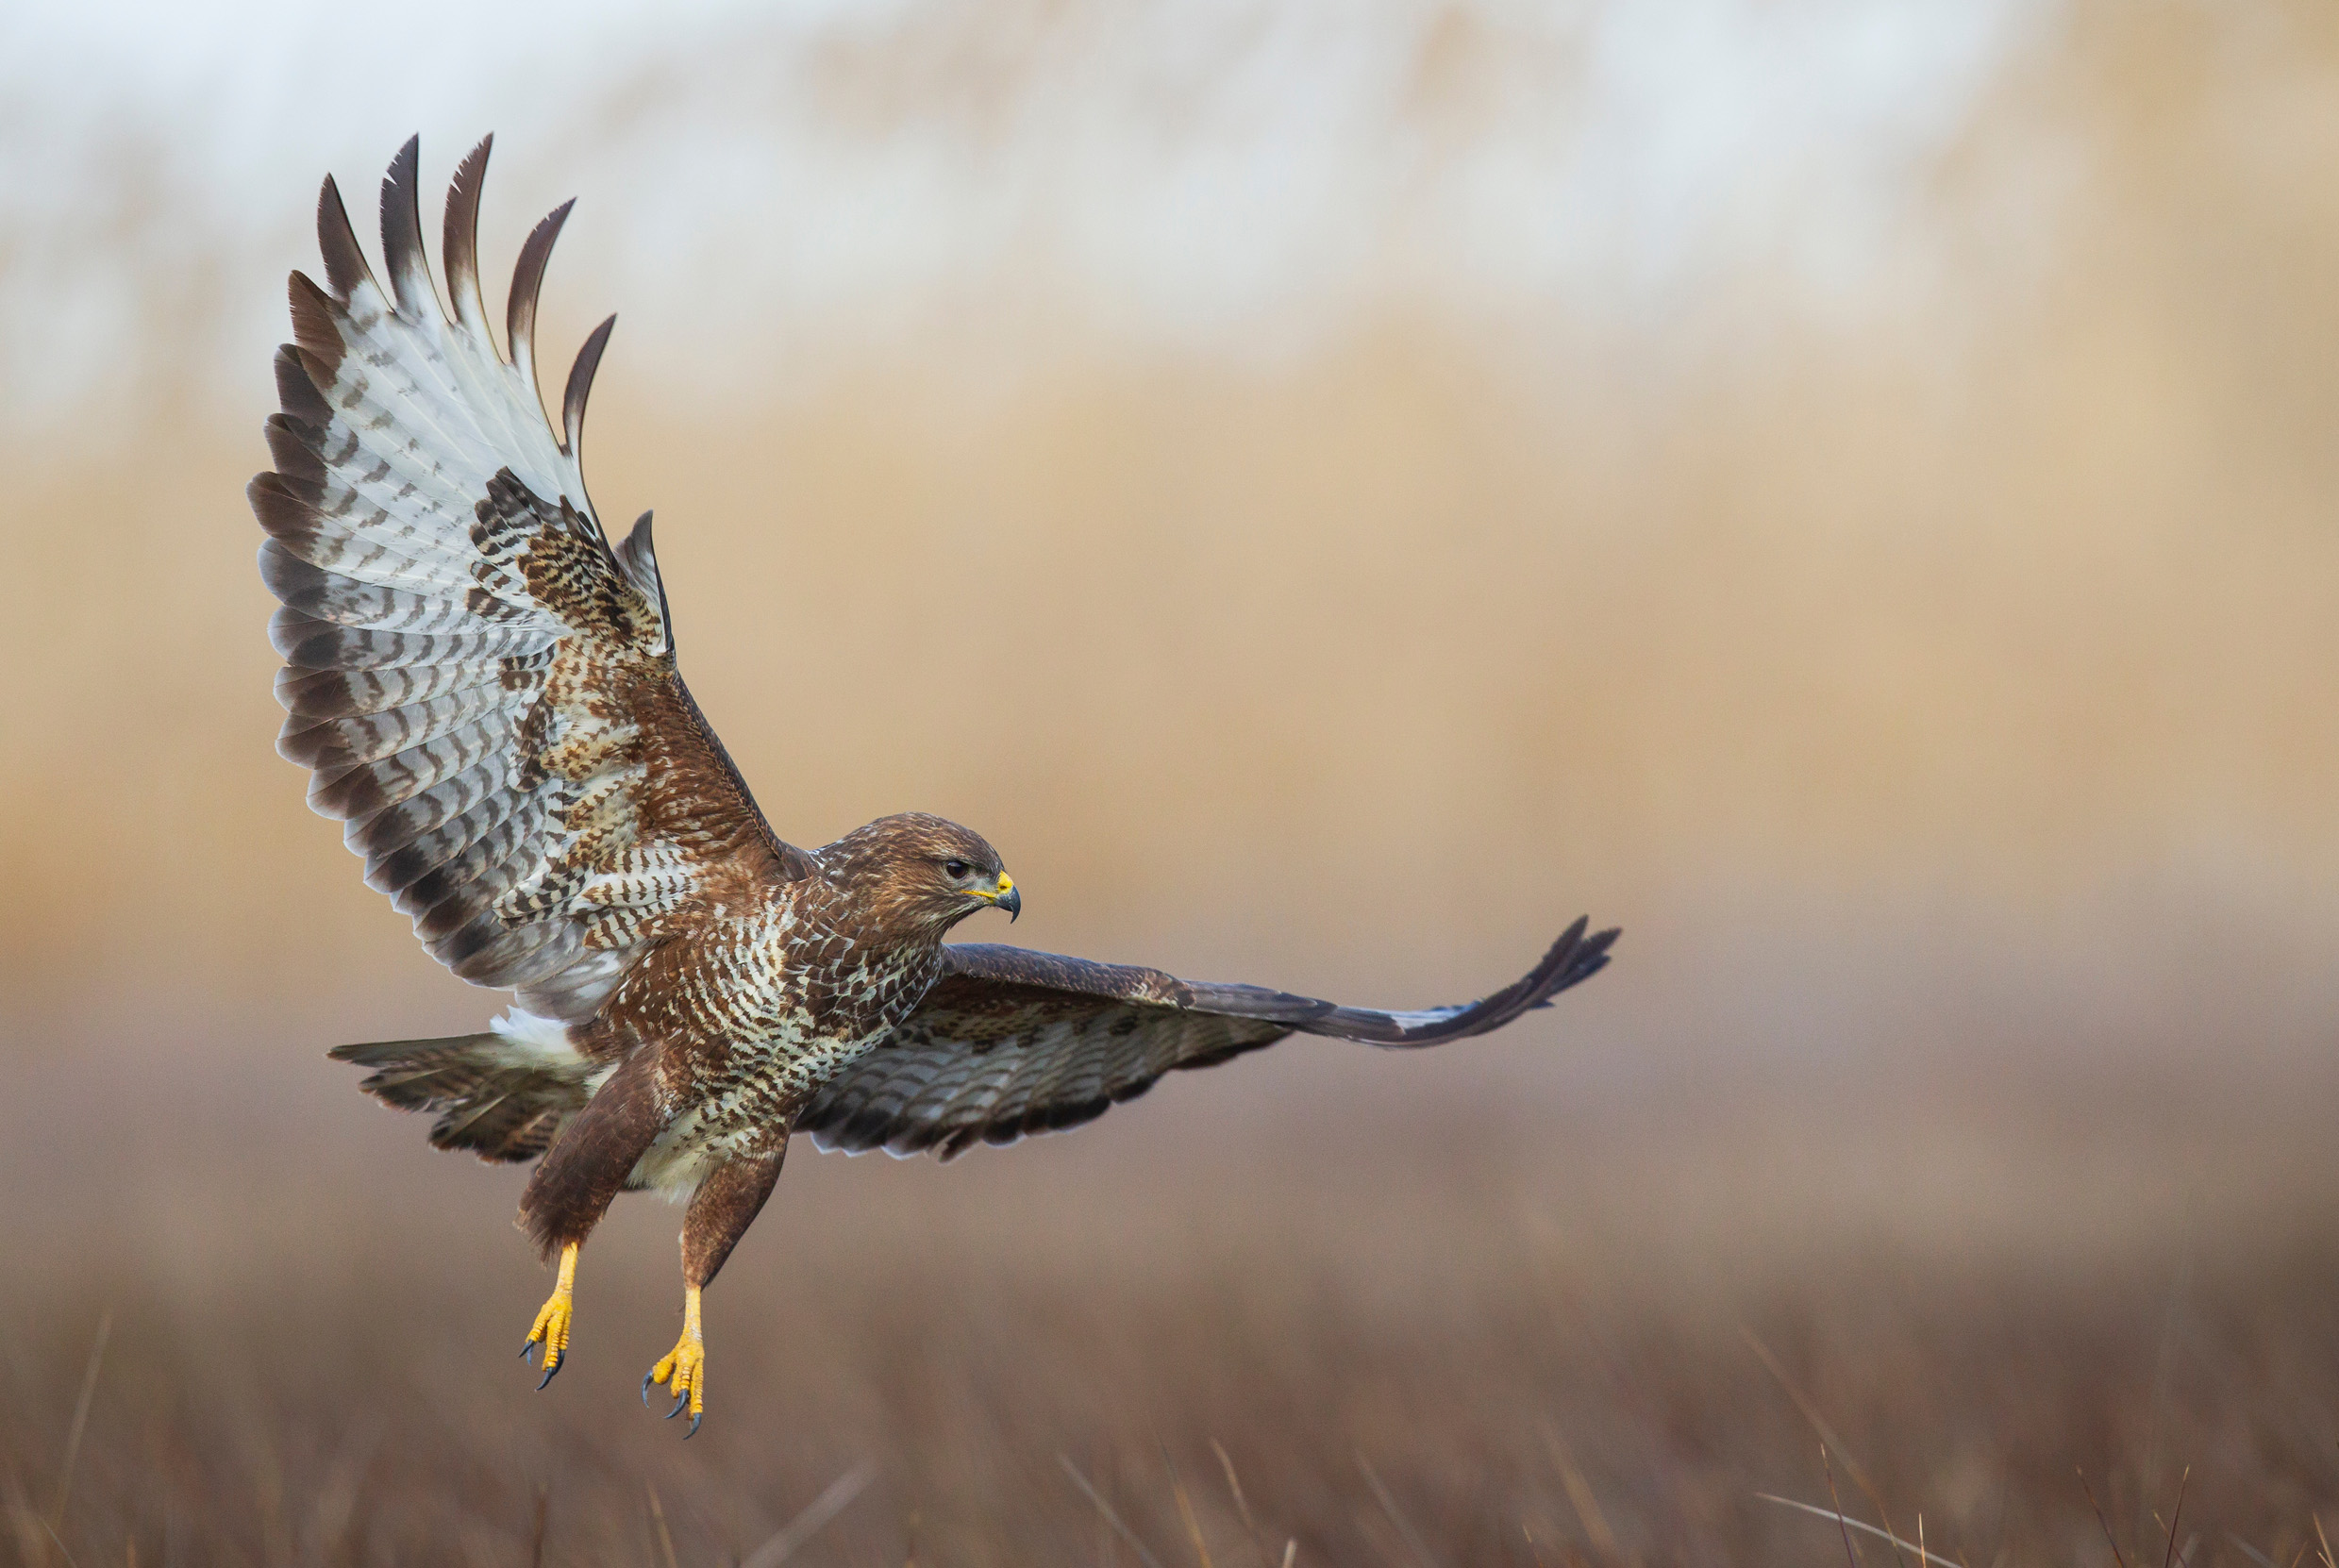 A Buzzard with wings fully outstretched, about to land amongst some beige grasses